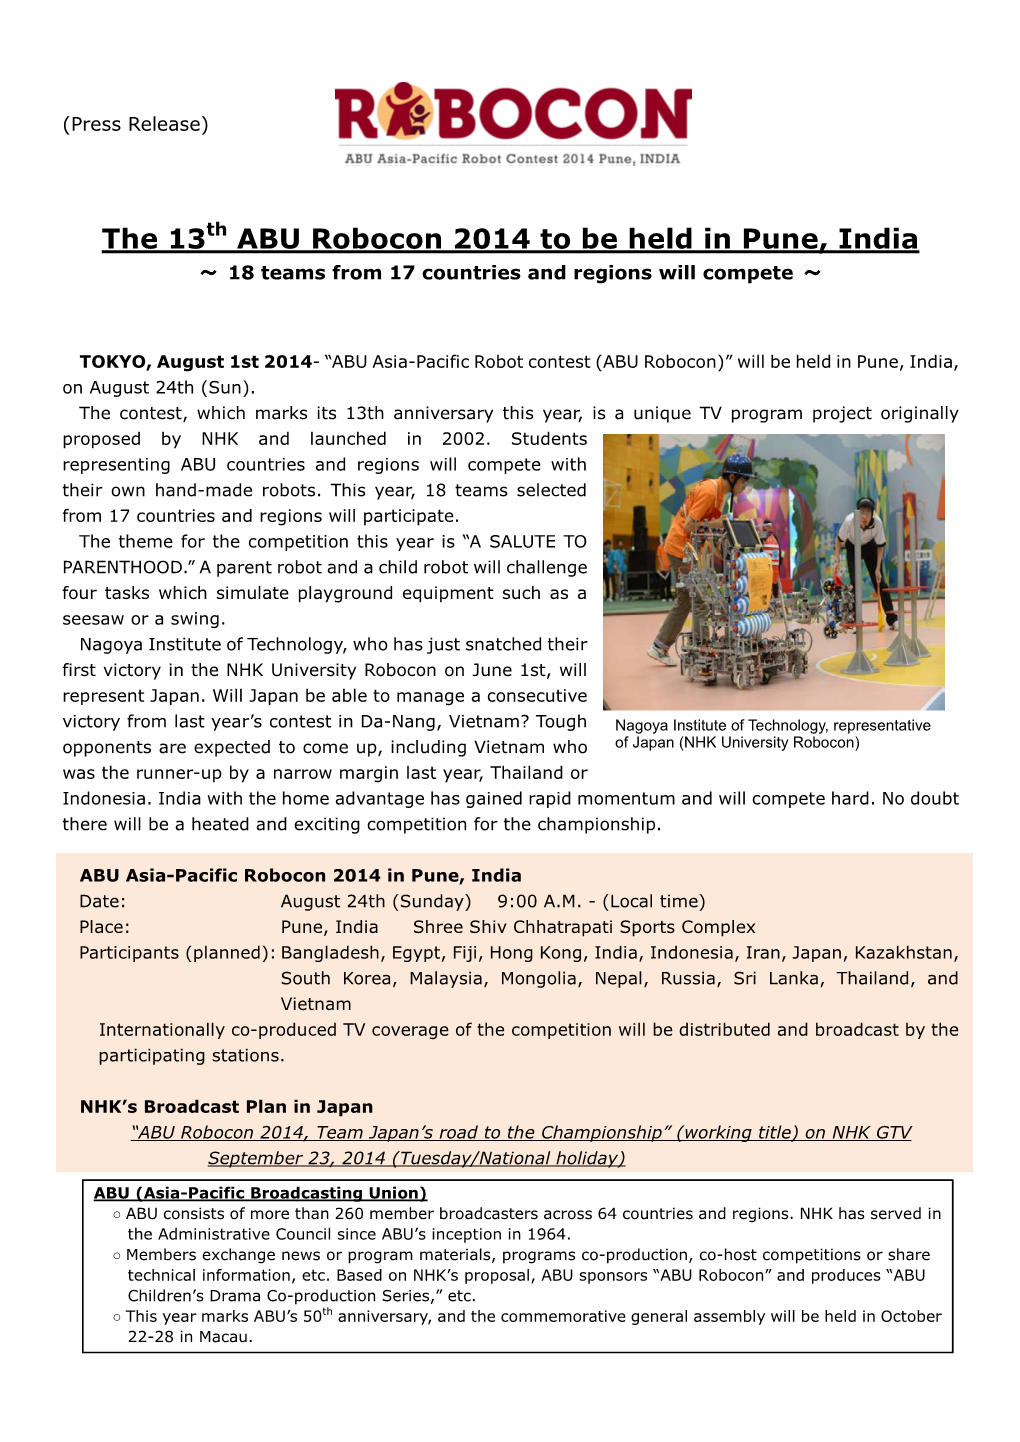 The 13Th ABU Robocon 2014 to Be Held in Pune, India 〜 18 Teams from 17 Countries and Regions Will Compete ～